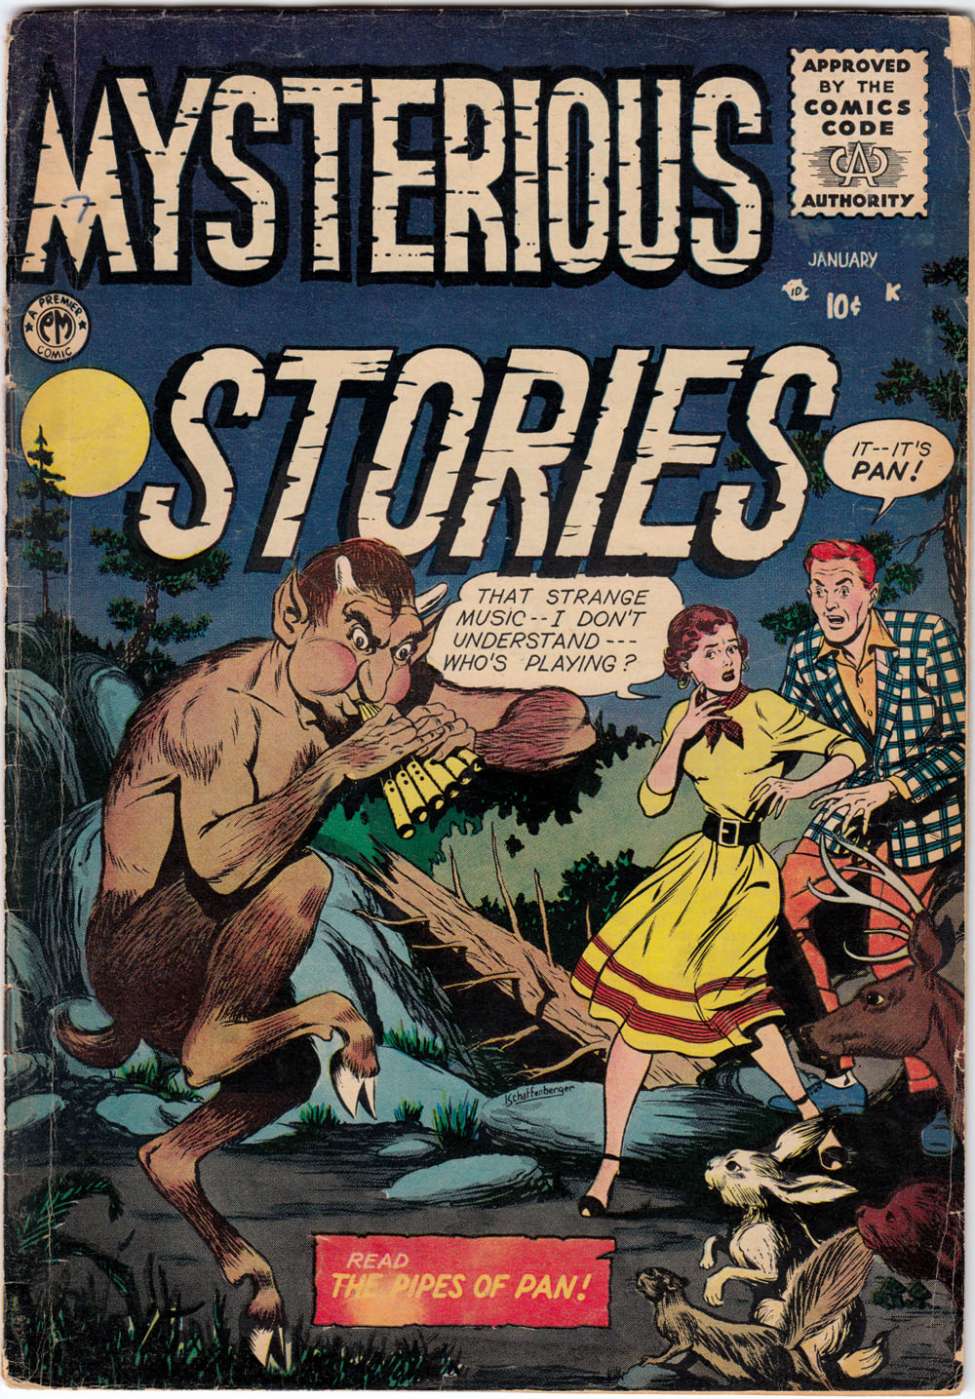 Book Cover For Mysterious Stories 7